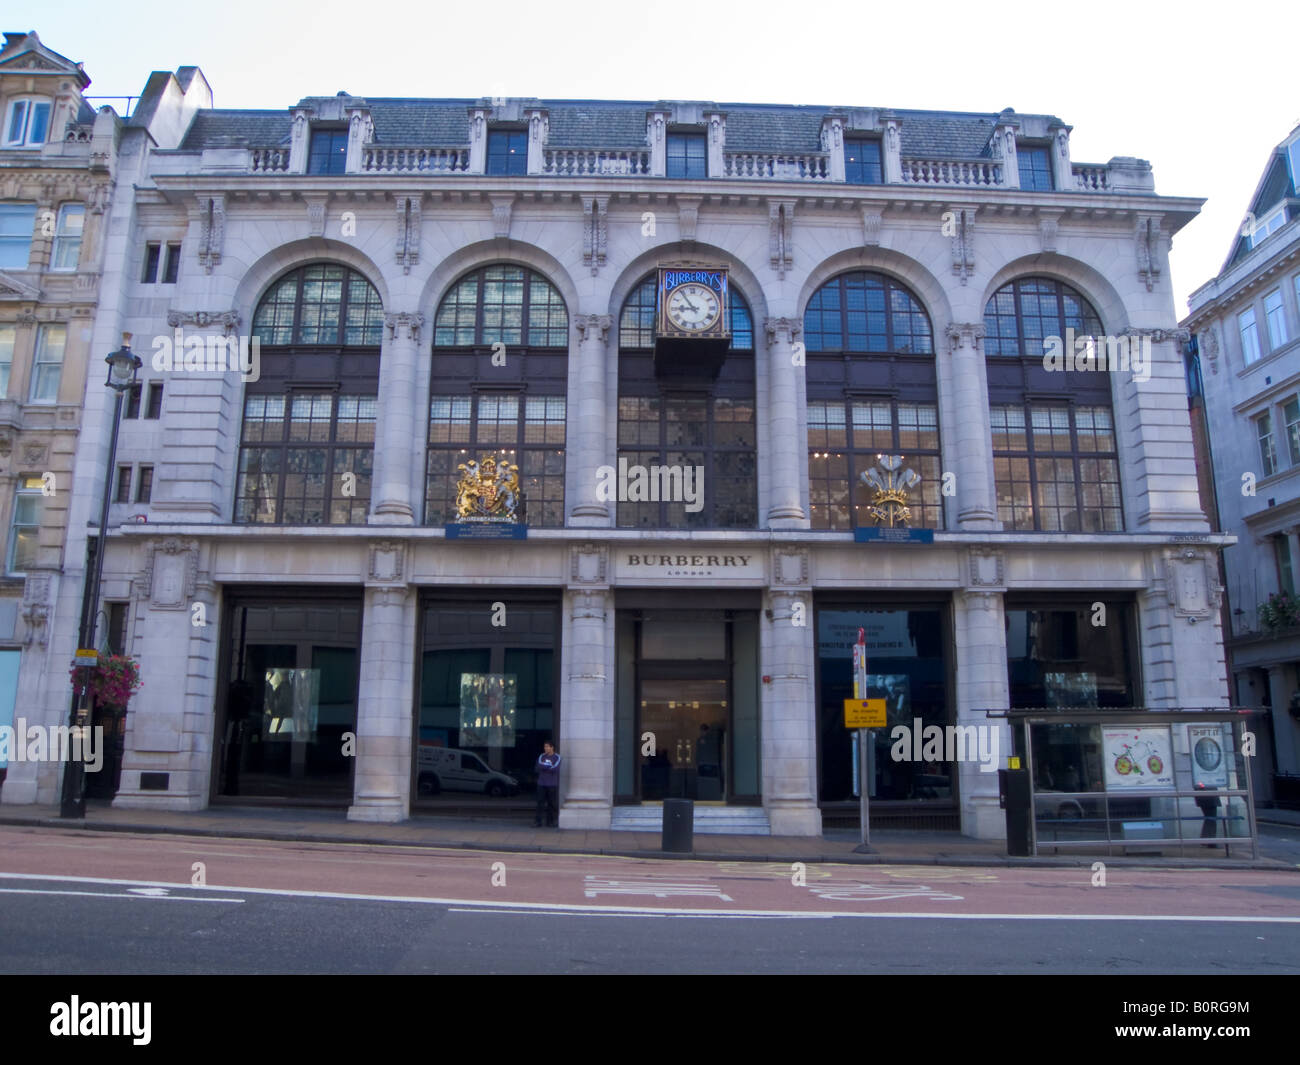 Burberry Shop London High Resolution Stock Photography and Images - Alamy